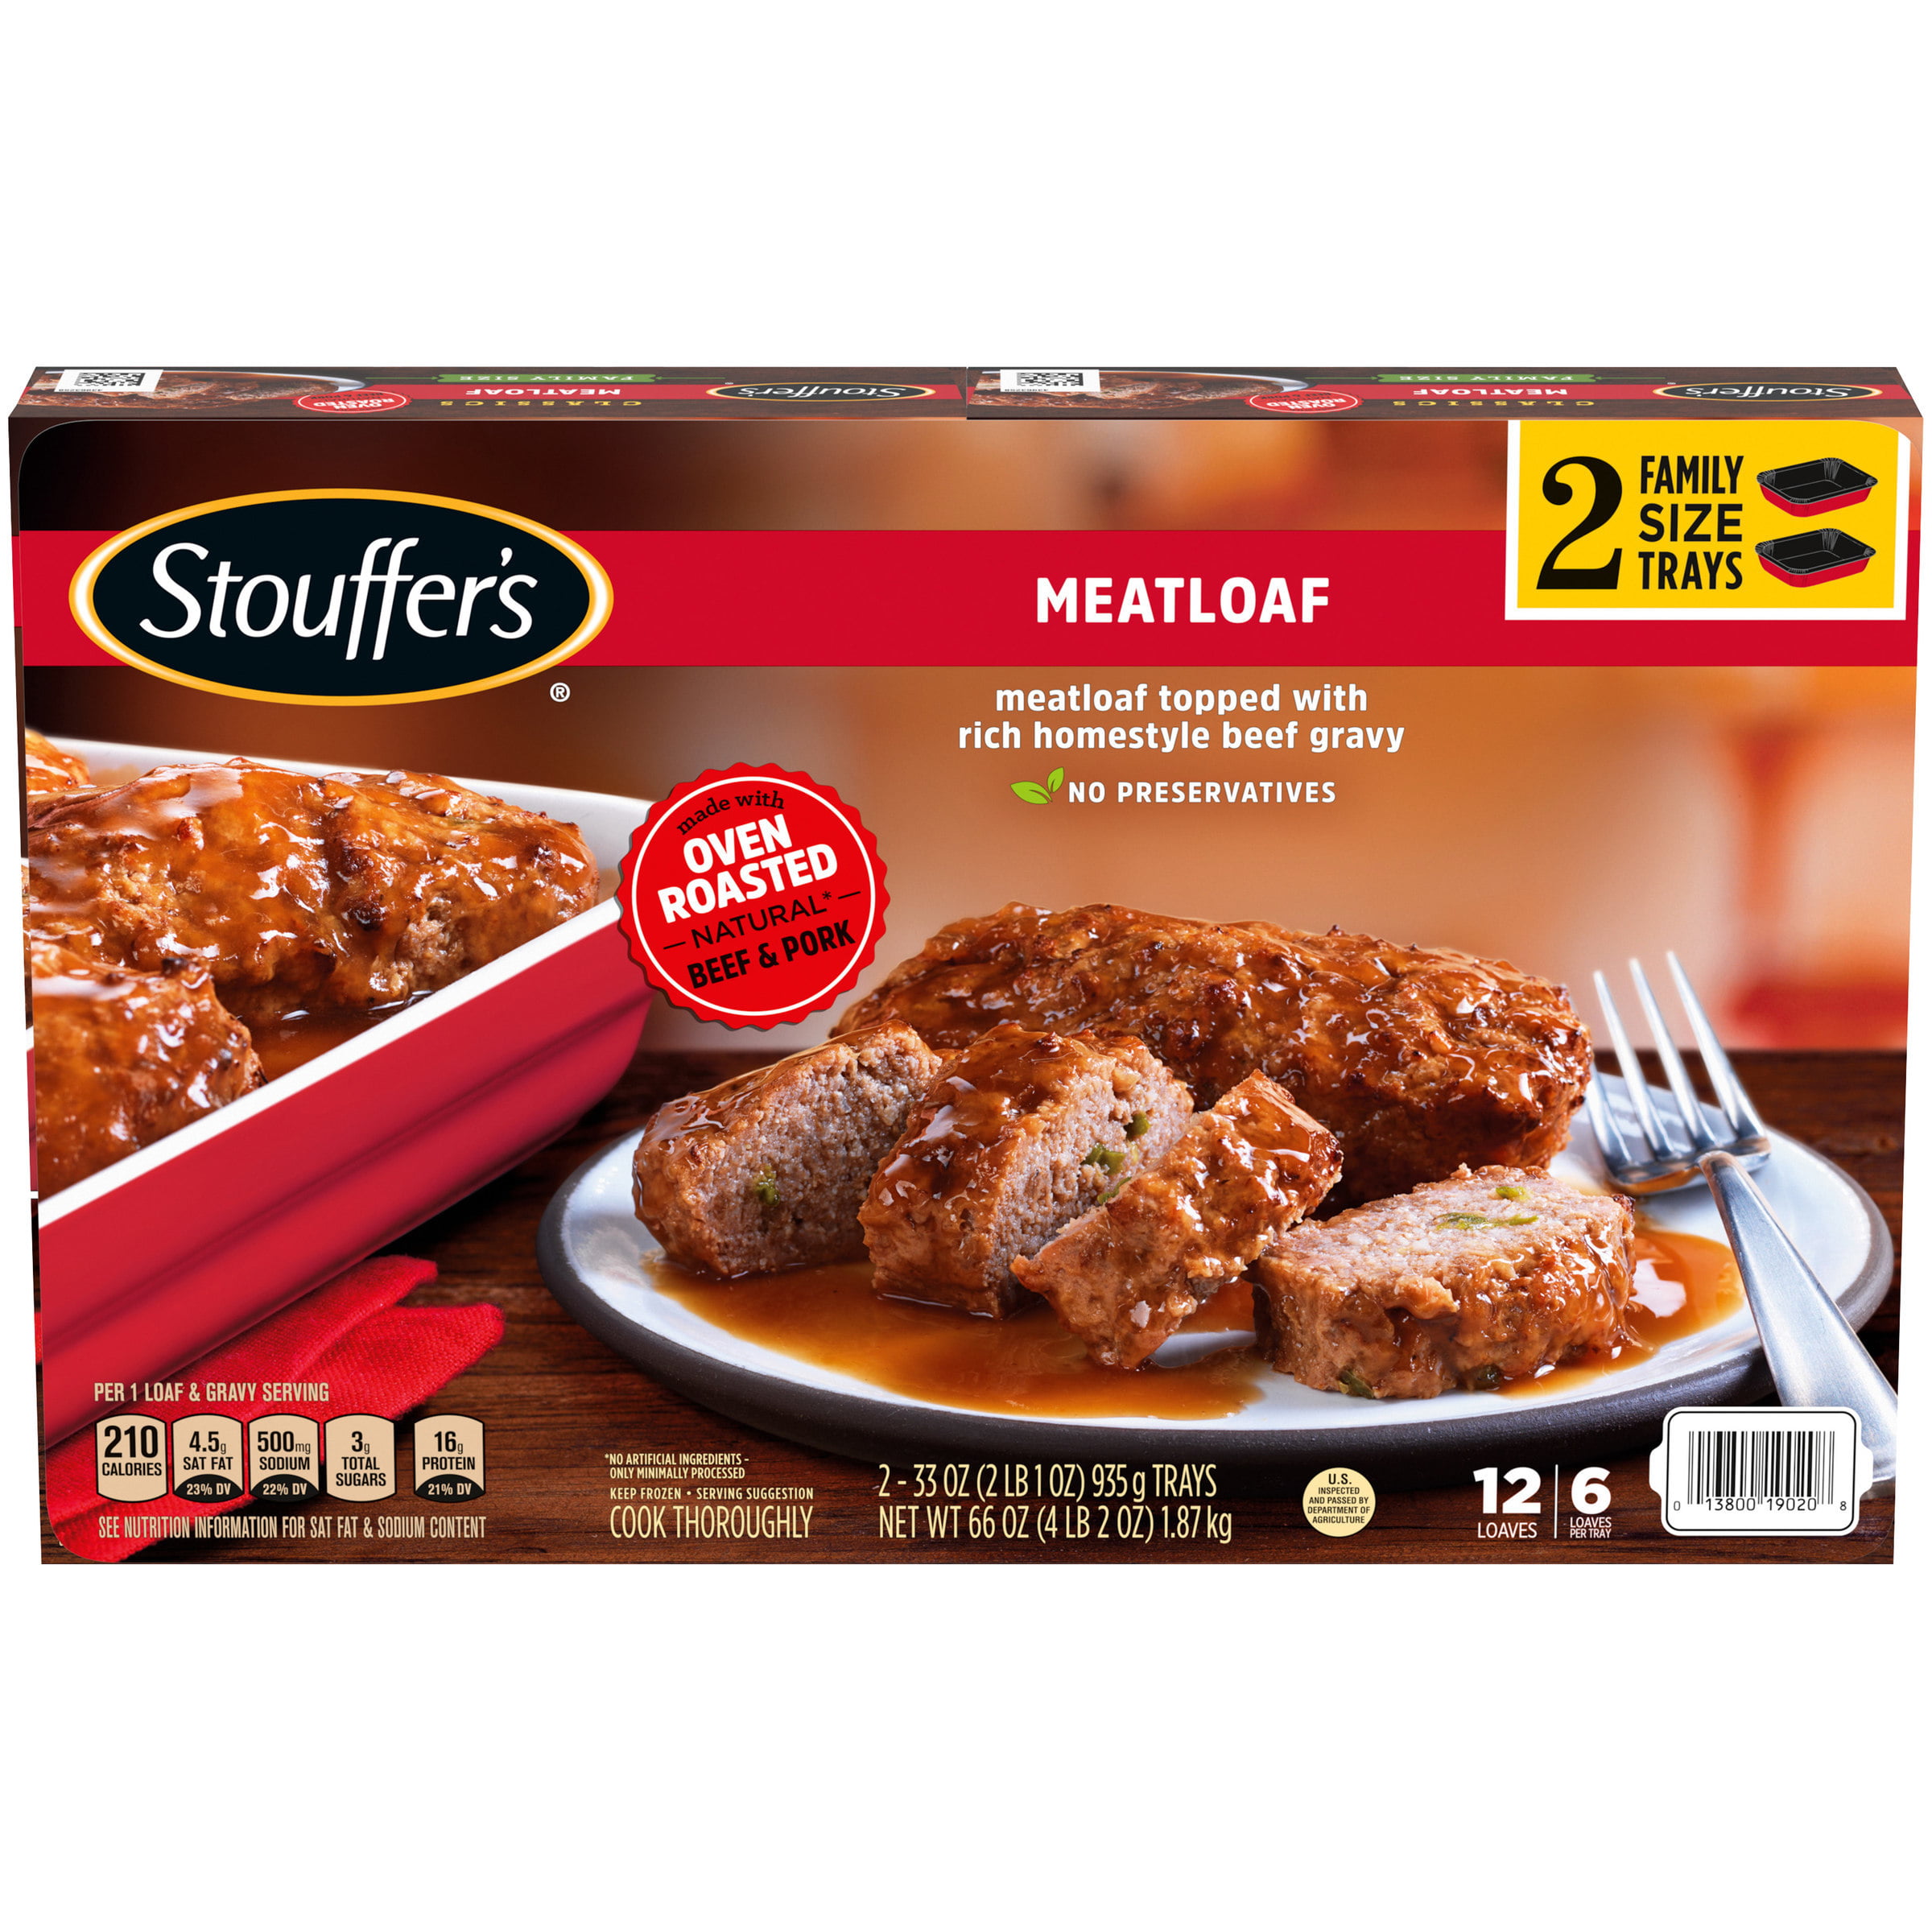 STOUFFER’S CLASSICS Meatloaf, Family Size Frozen Meal - Walmart.com